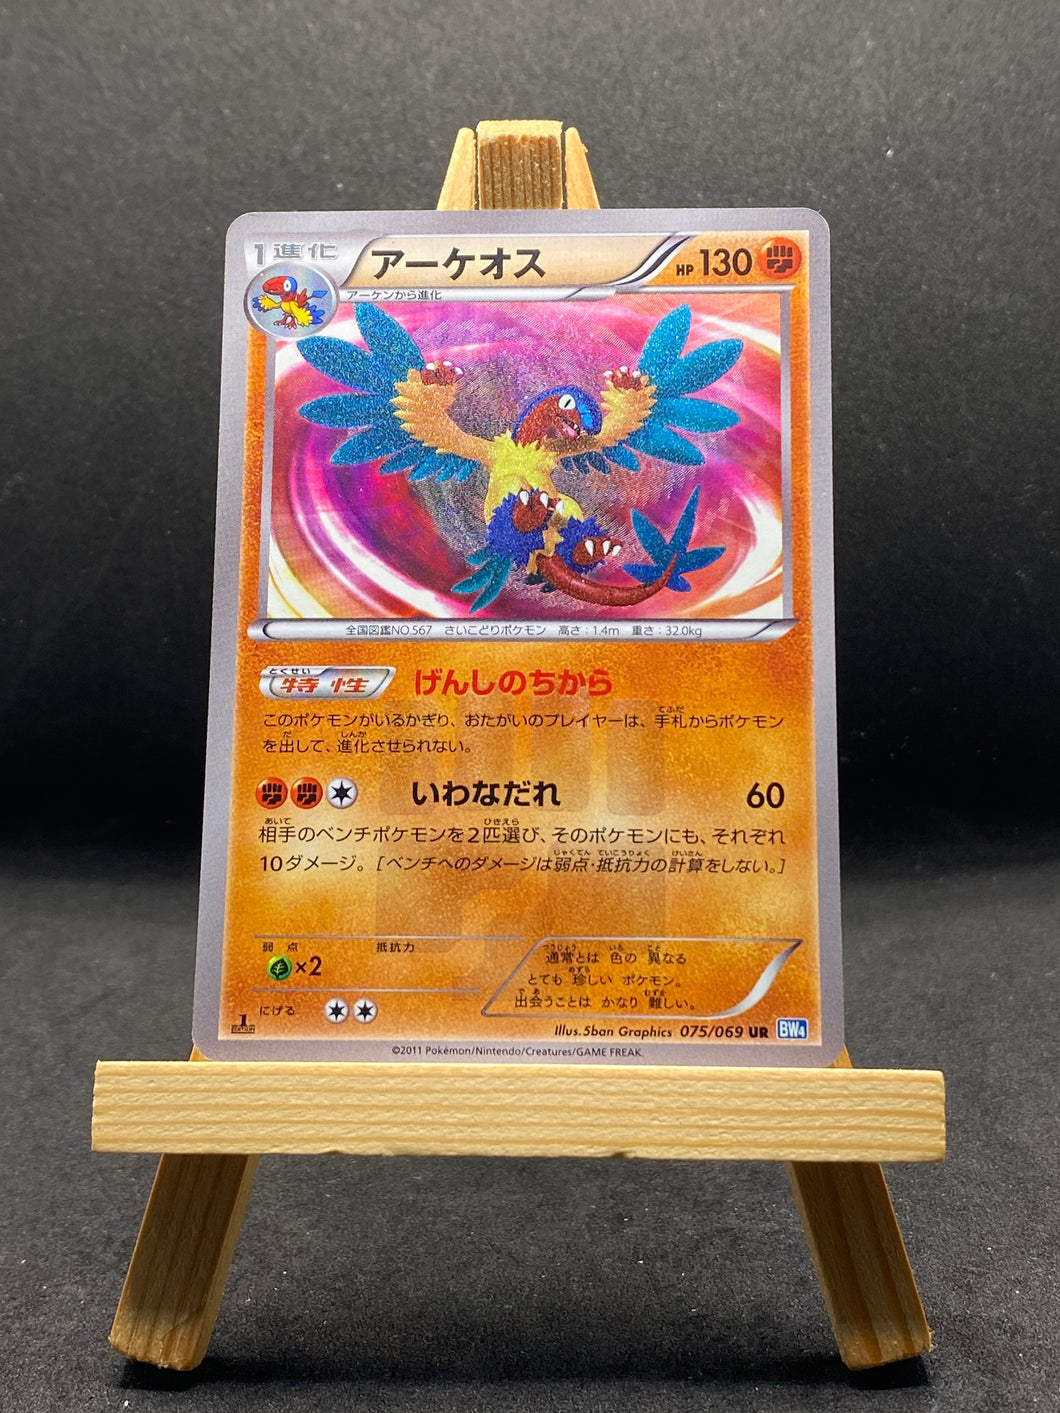 Copy of Archeops - 075/069 - Holo - Dark Rush - Japanese - 1st edition - [Gd]